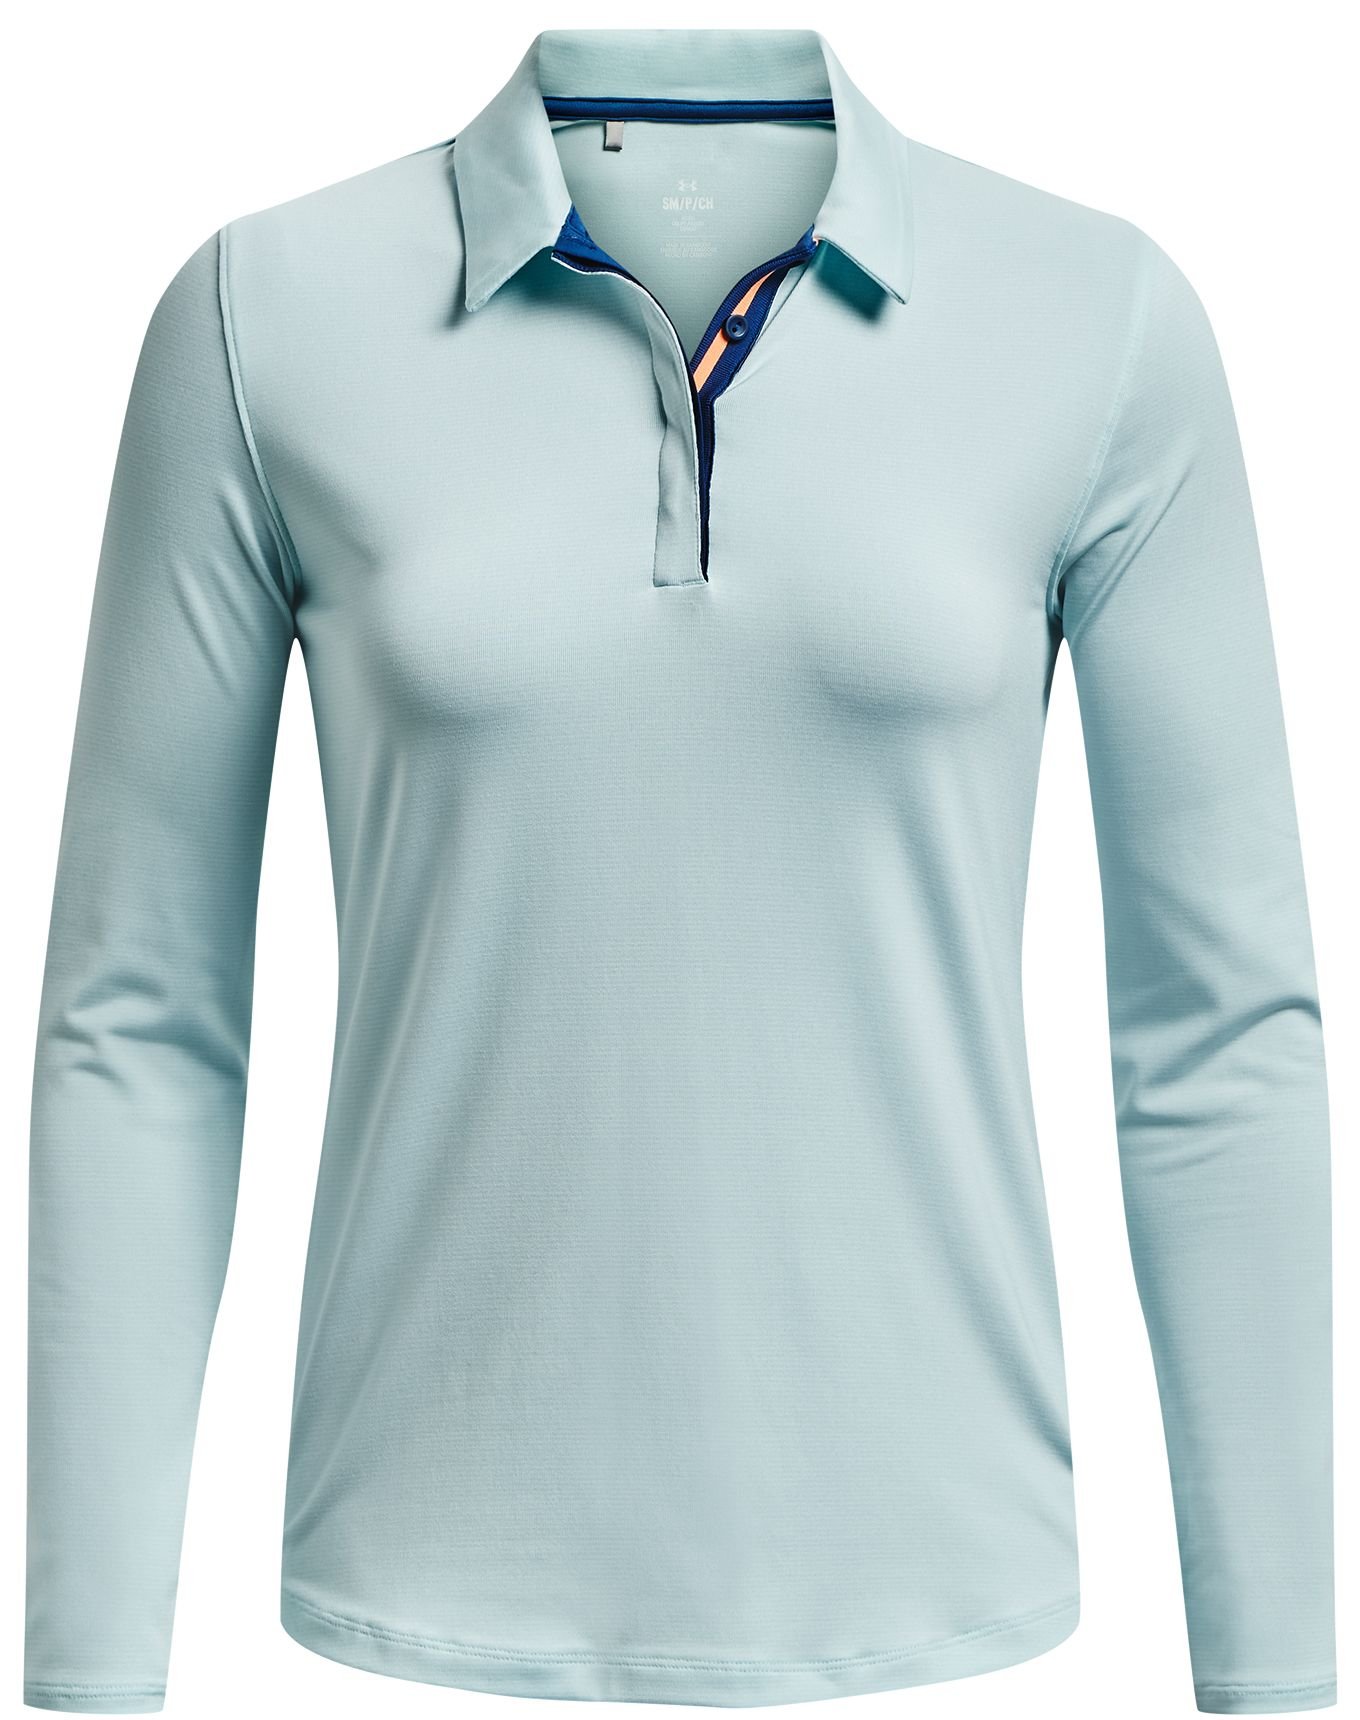 Under Armour Women's Zinger MicroStripe Long Sleeve Polo - Carl's Golfland